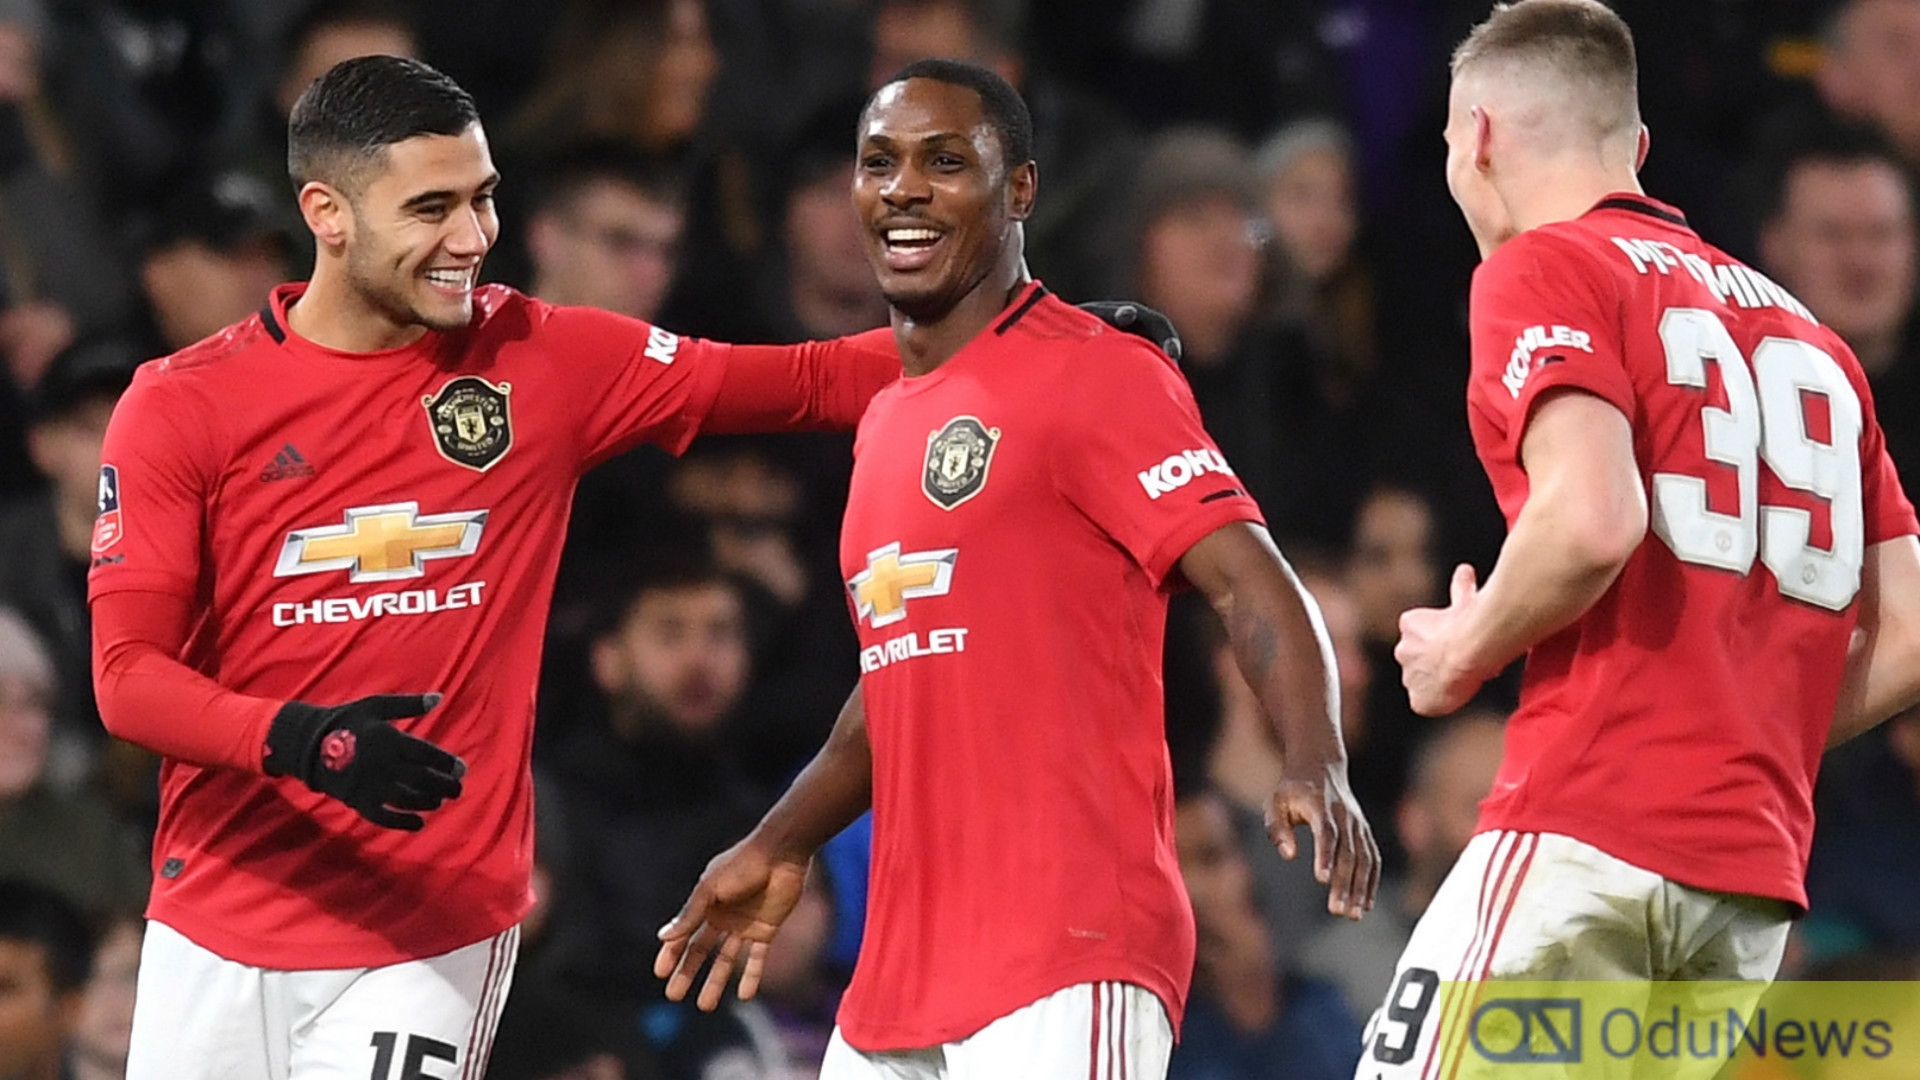 Odion Ighalo Rises To Become Man Utd Fans' Favorite After Encounter With Derby  